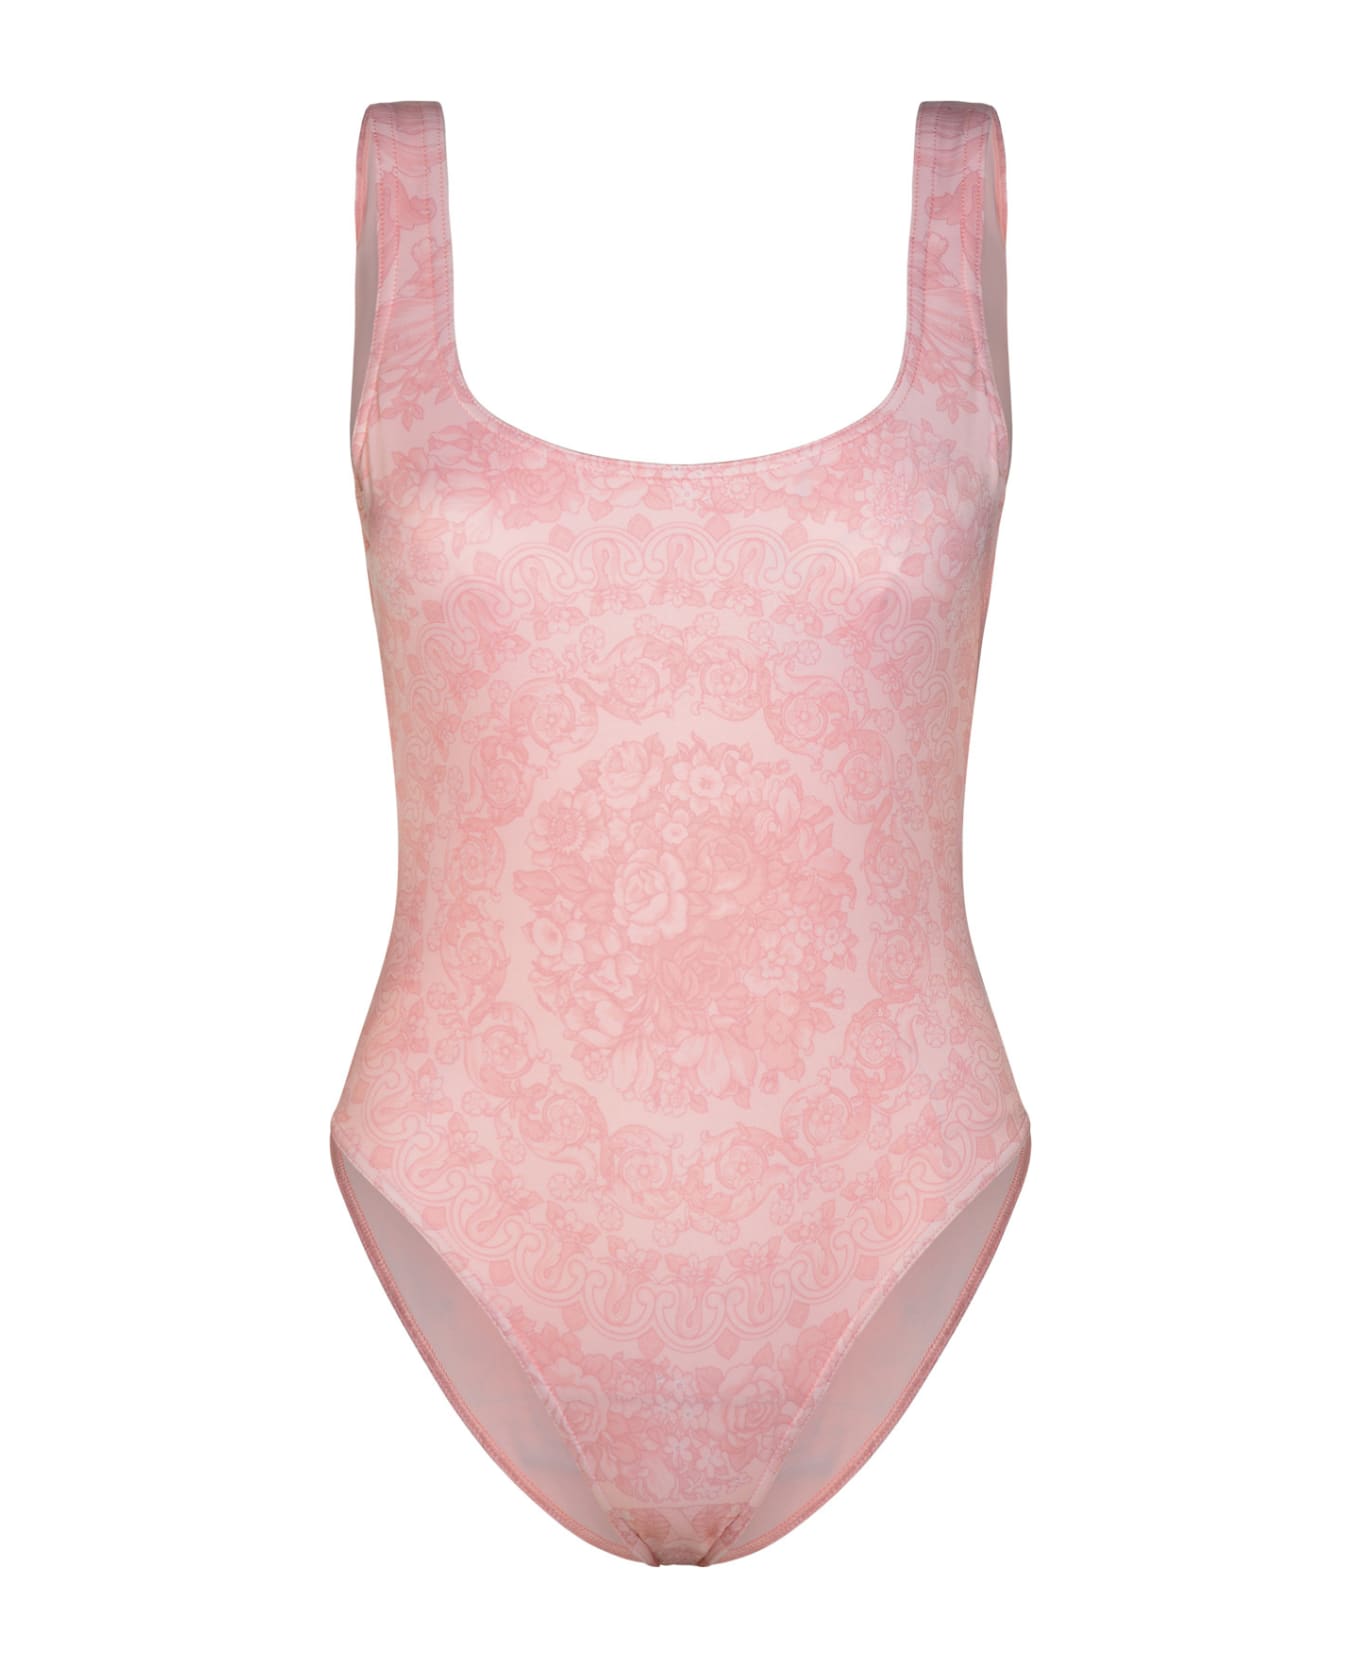 Versace 'barocco' One-piece Swimsuit In Pink Polyester Blend - Pale Pink